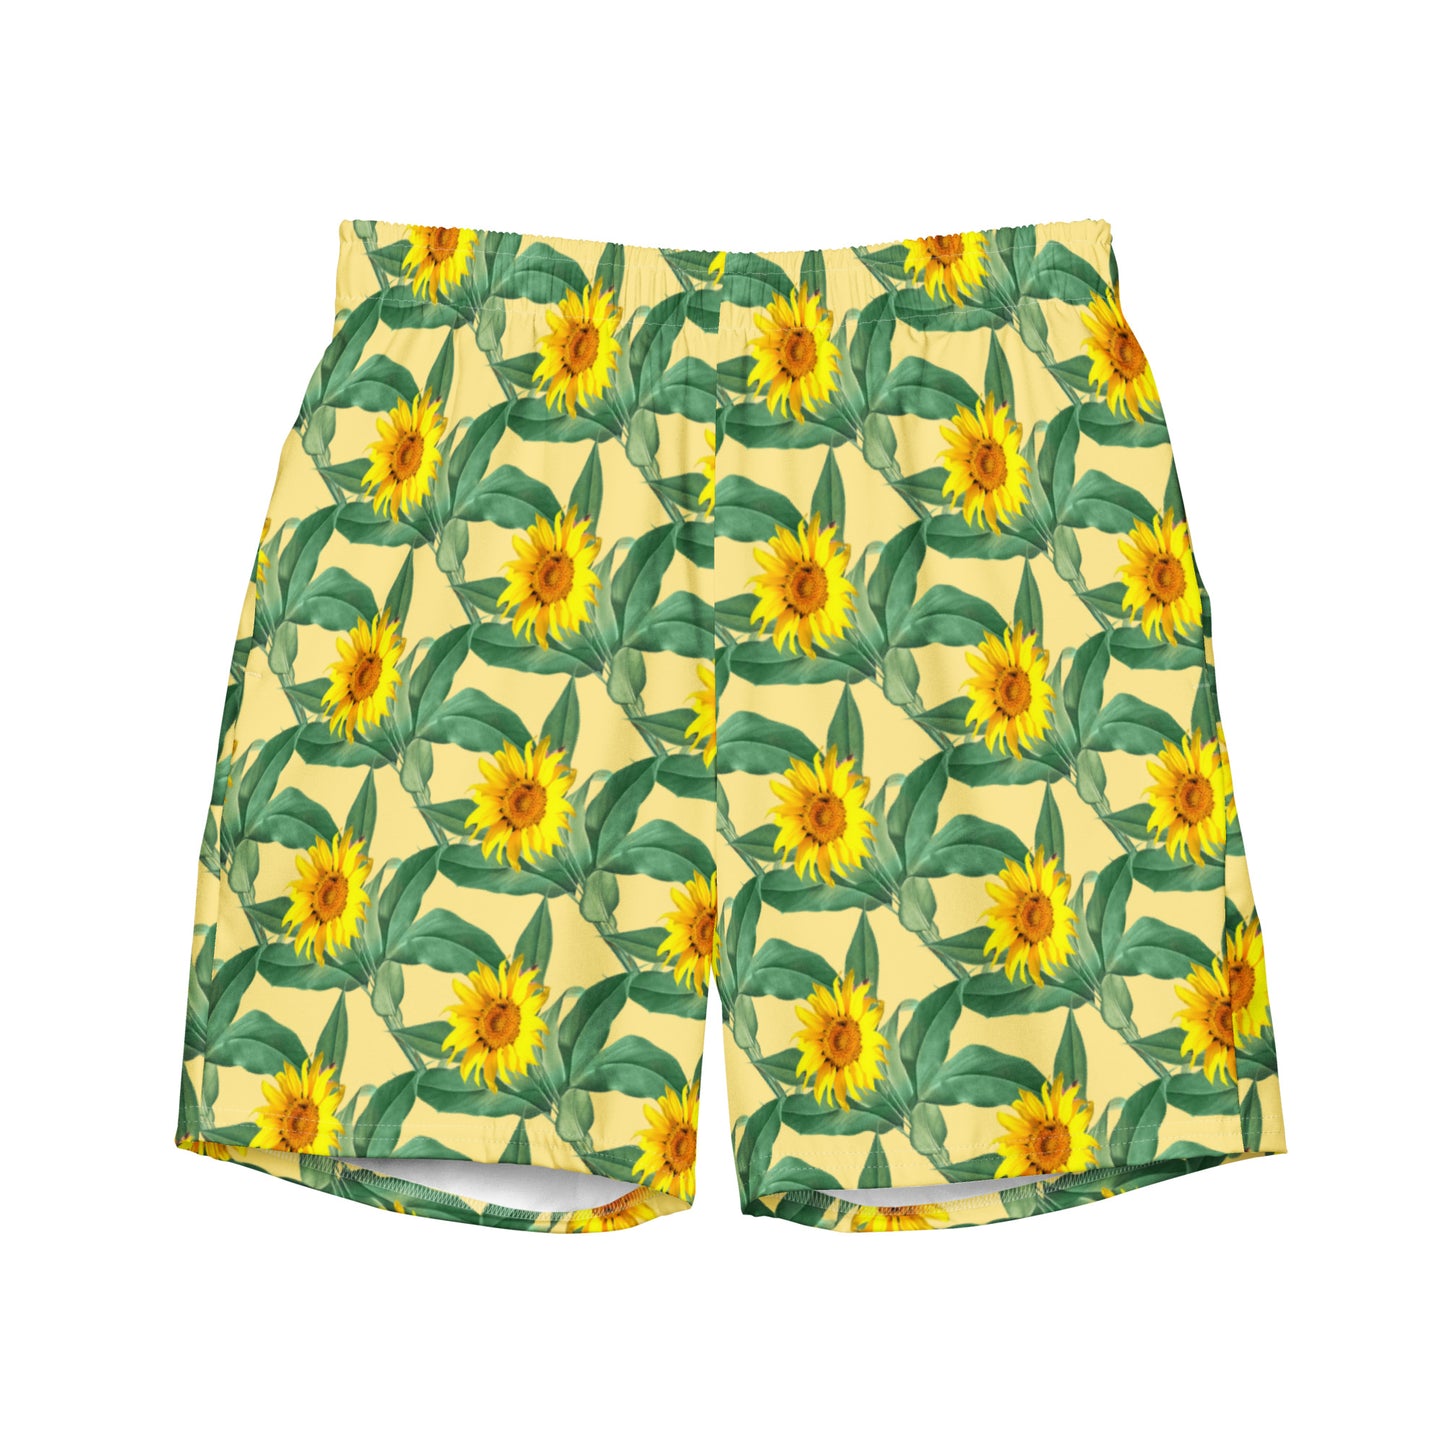 All-Over Print Recycled Swim Shorts: Sunflowers